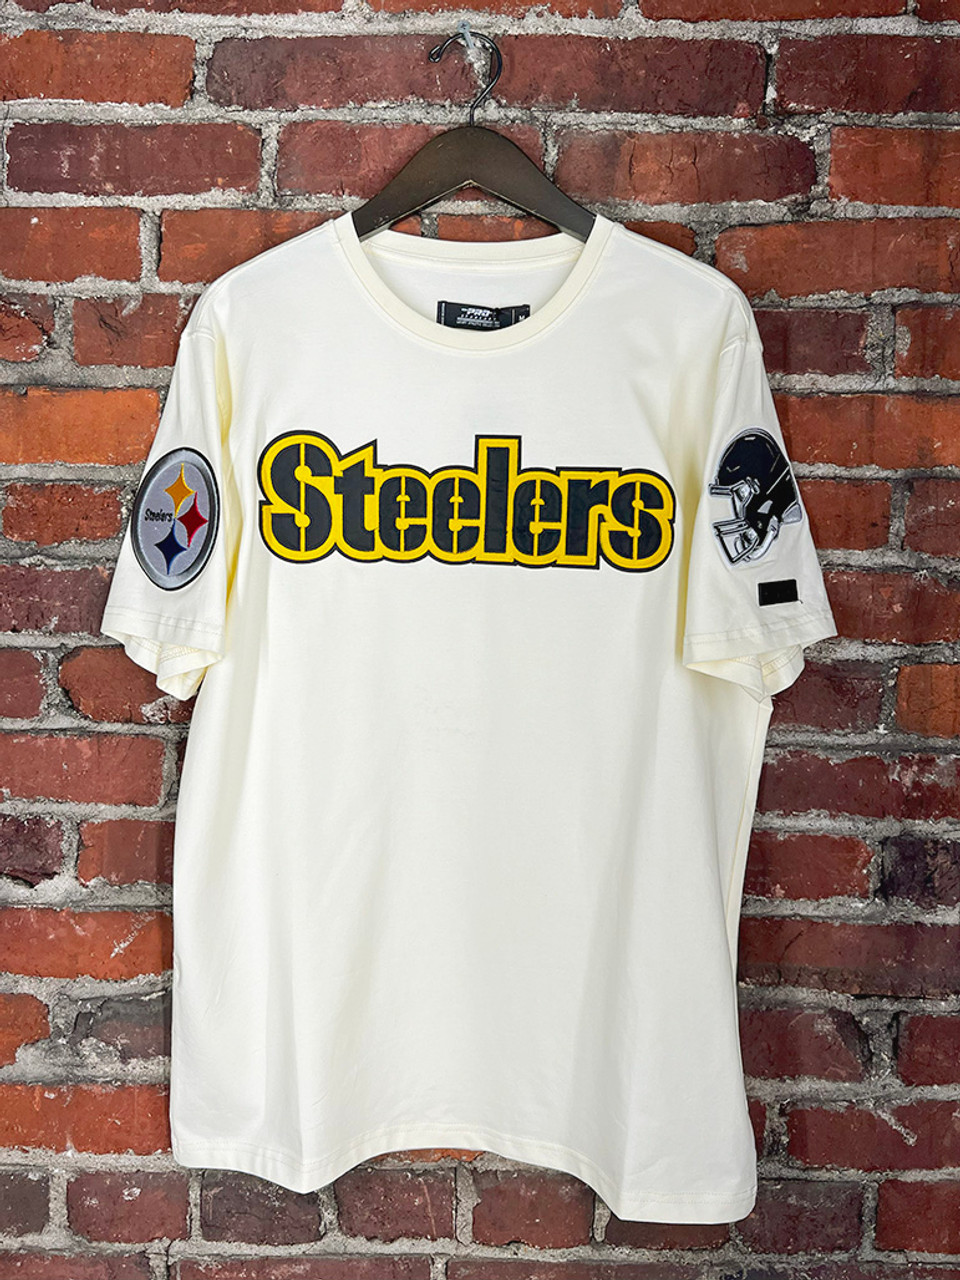 2022 PITTSBURGH STEELERS OFFICIAL NFL TRAINING CAMP T-SHIRT